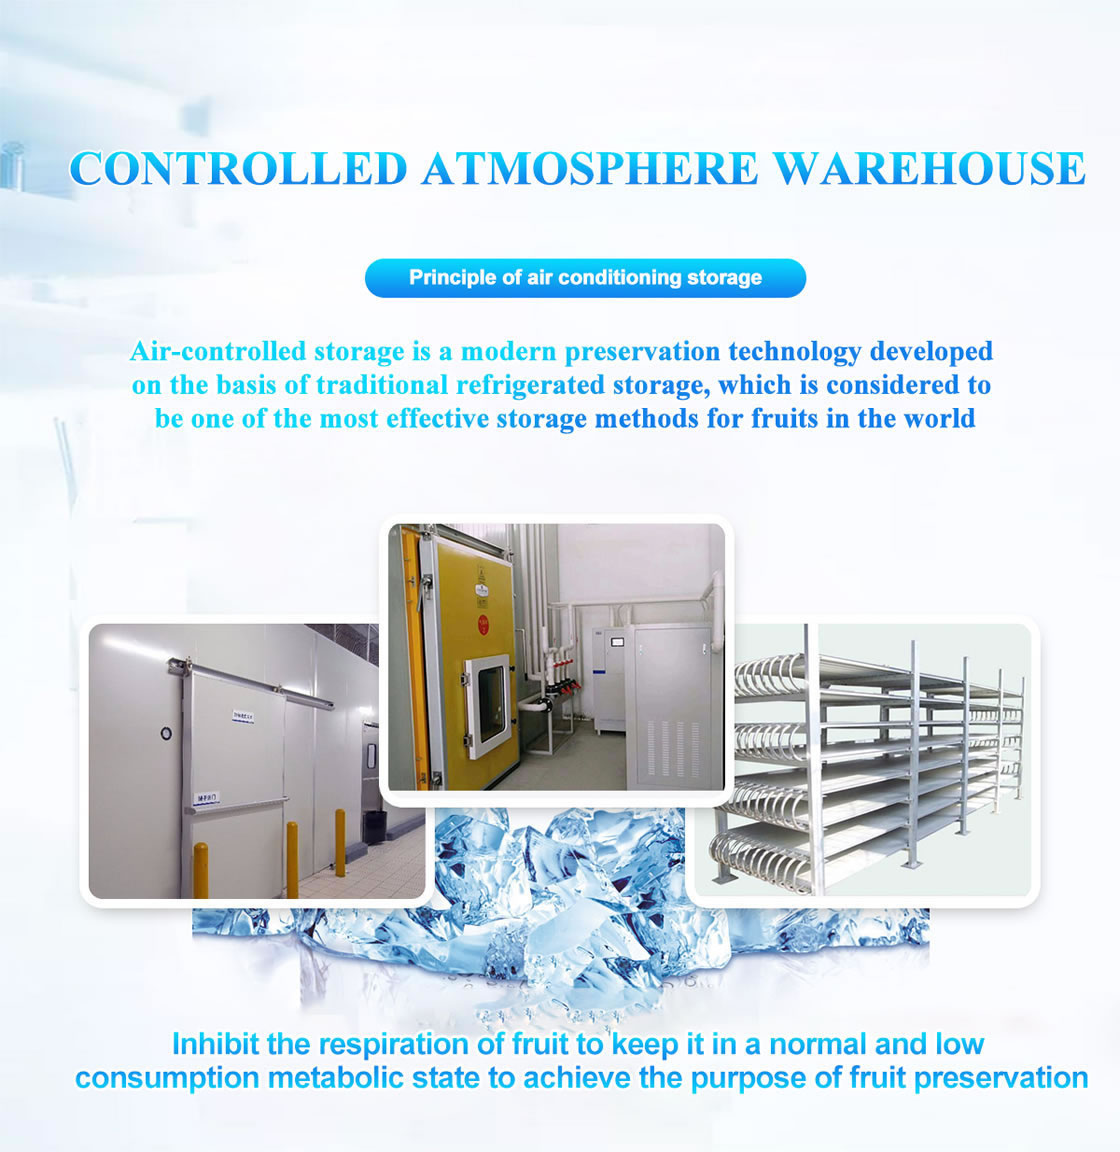 CONTROLLED ATMOSPHERE COLD ROOMS